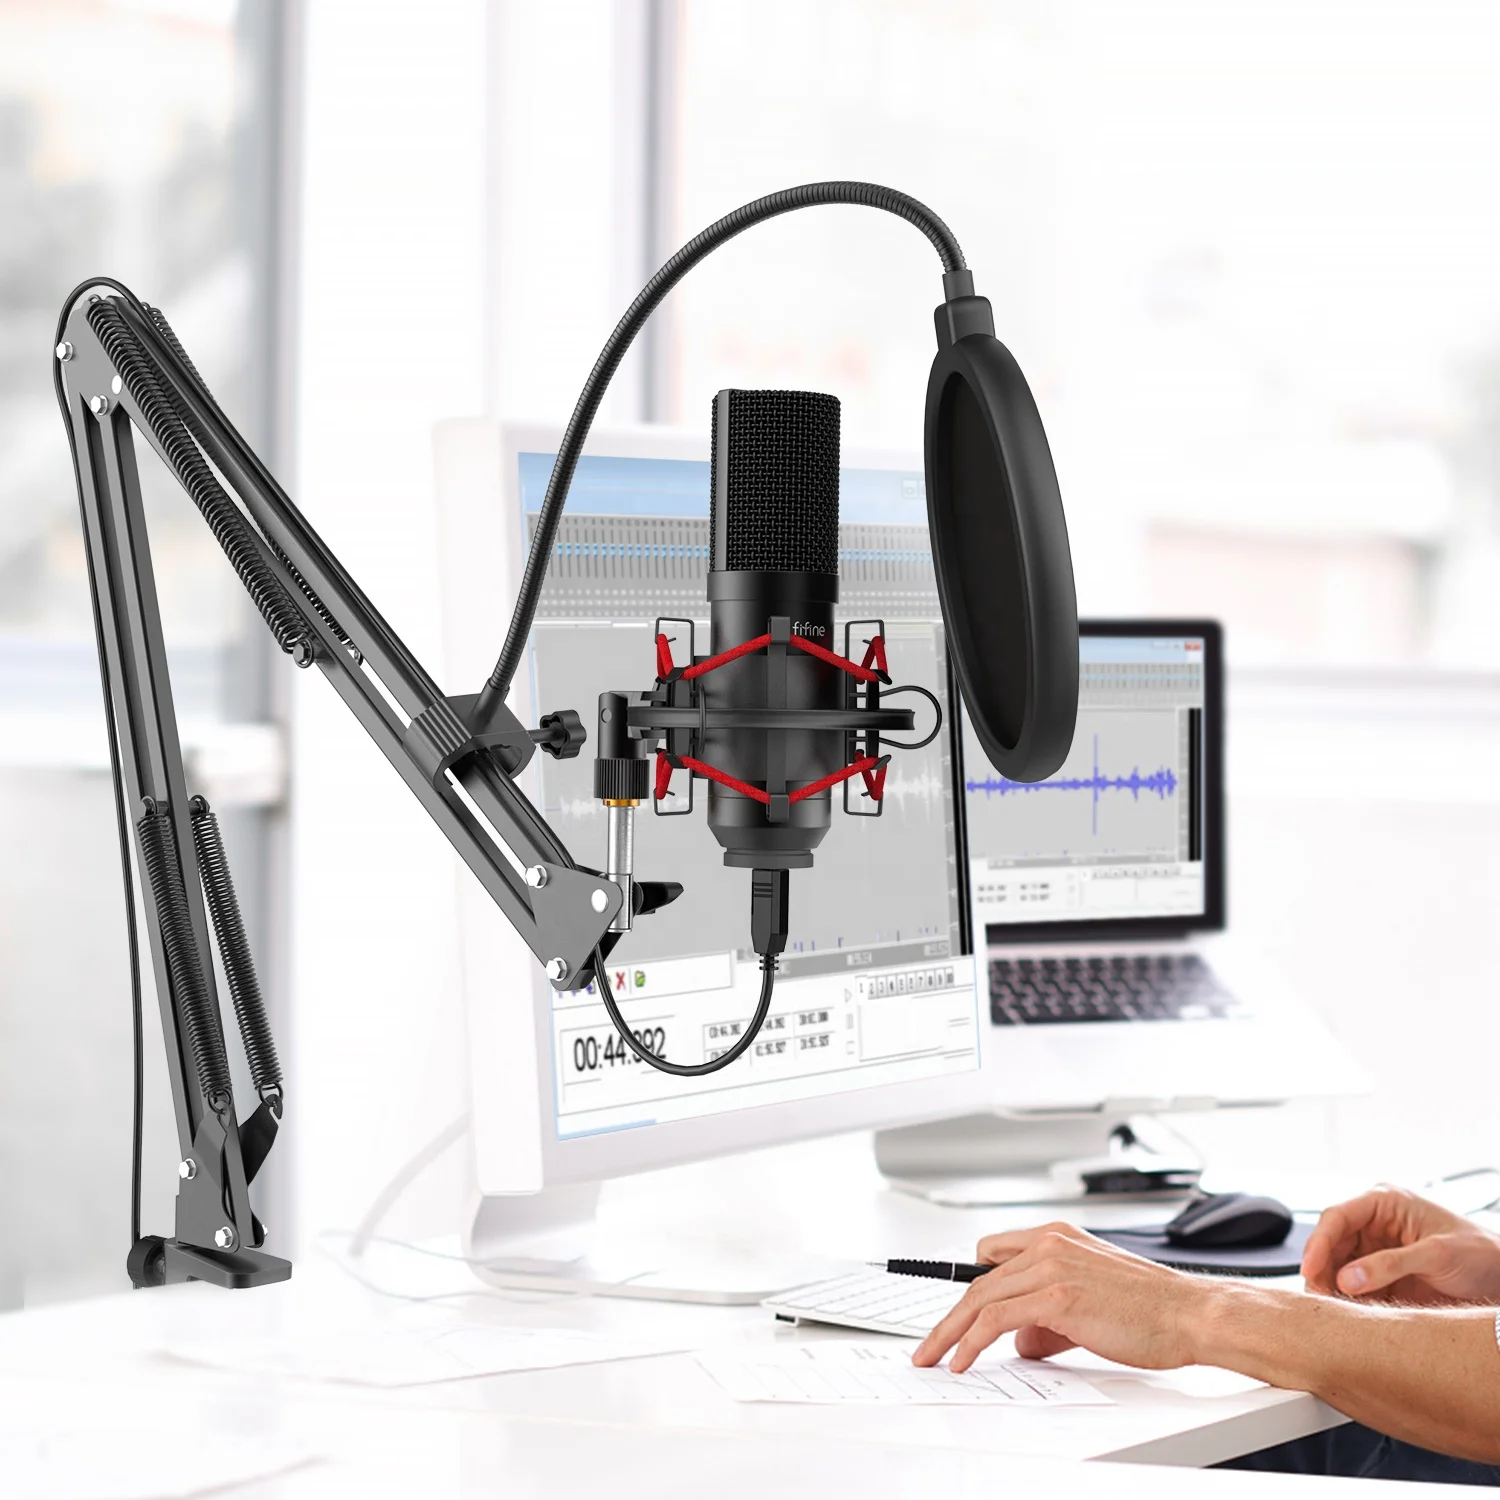 

Fifine T732 Estudio Condenser Mic Streaming Recording USB Cable Computer Microphone With Scissor Arm Stand, Black